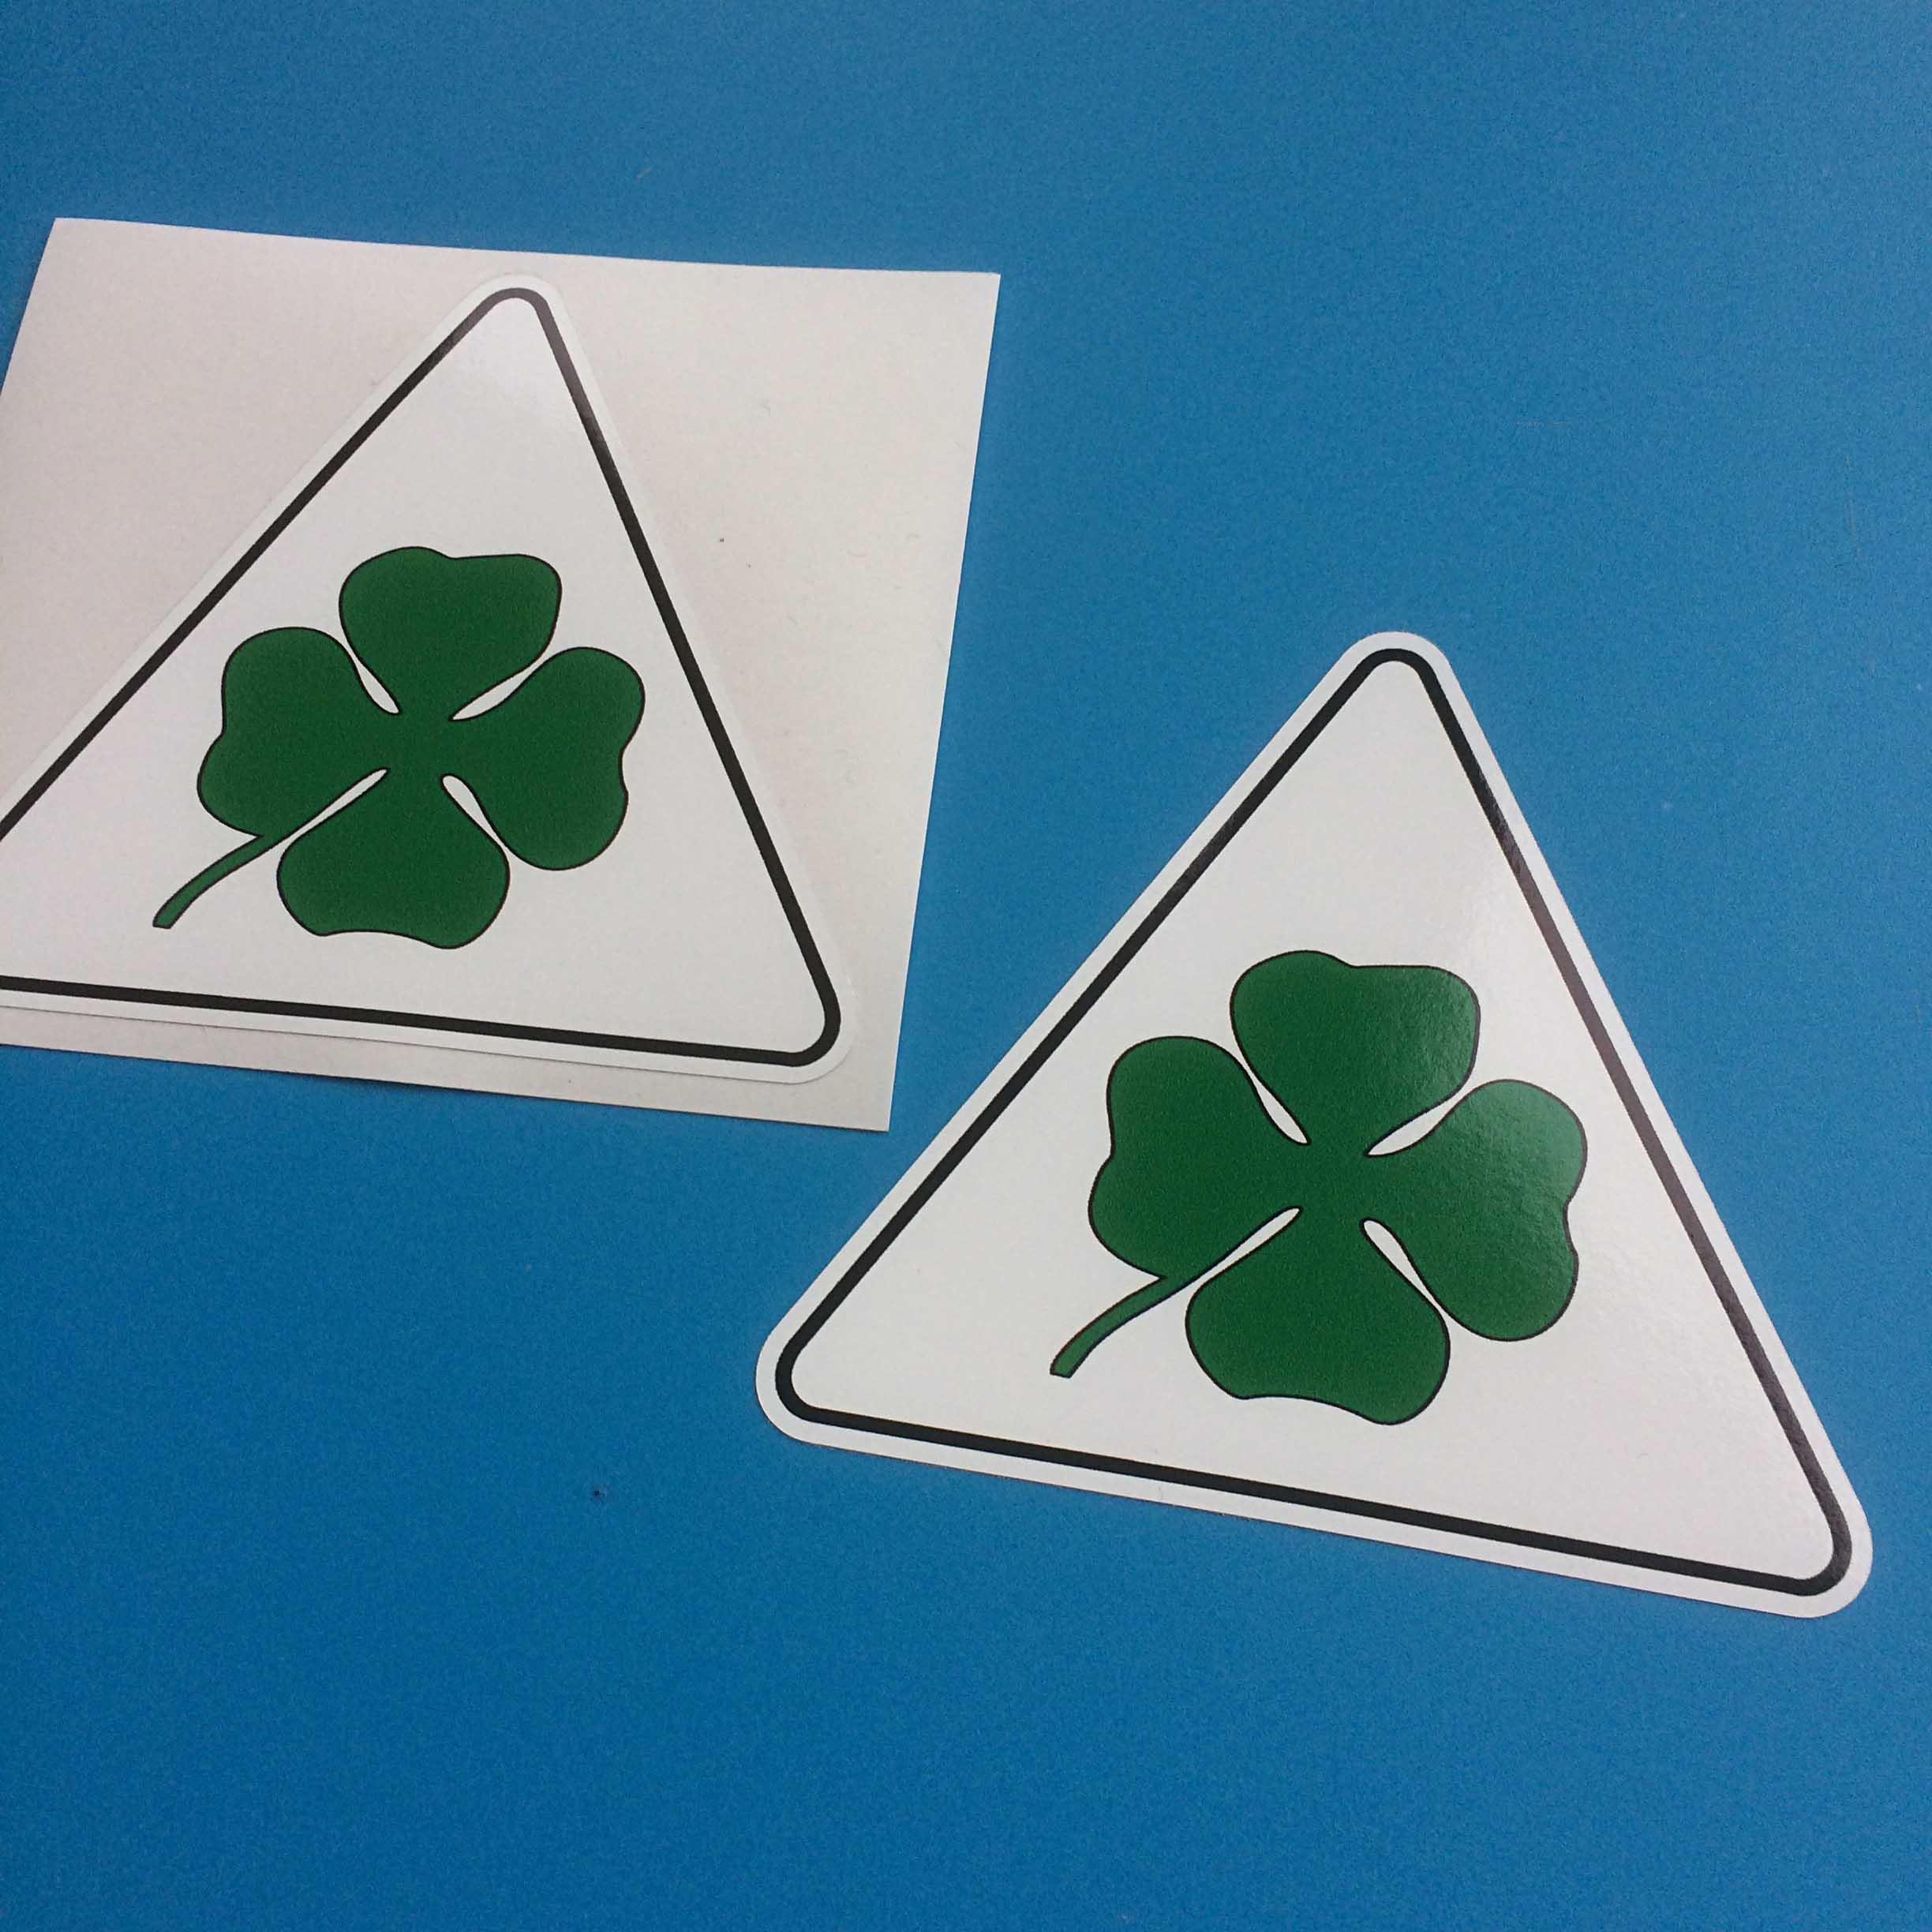 A white triangular sticker with a black border. In the centre is a green four leaf clover.